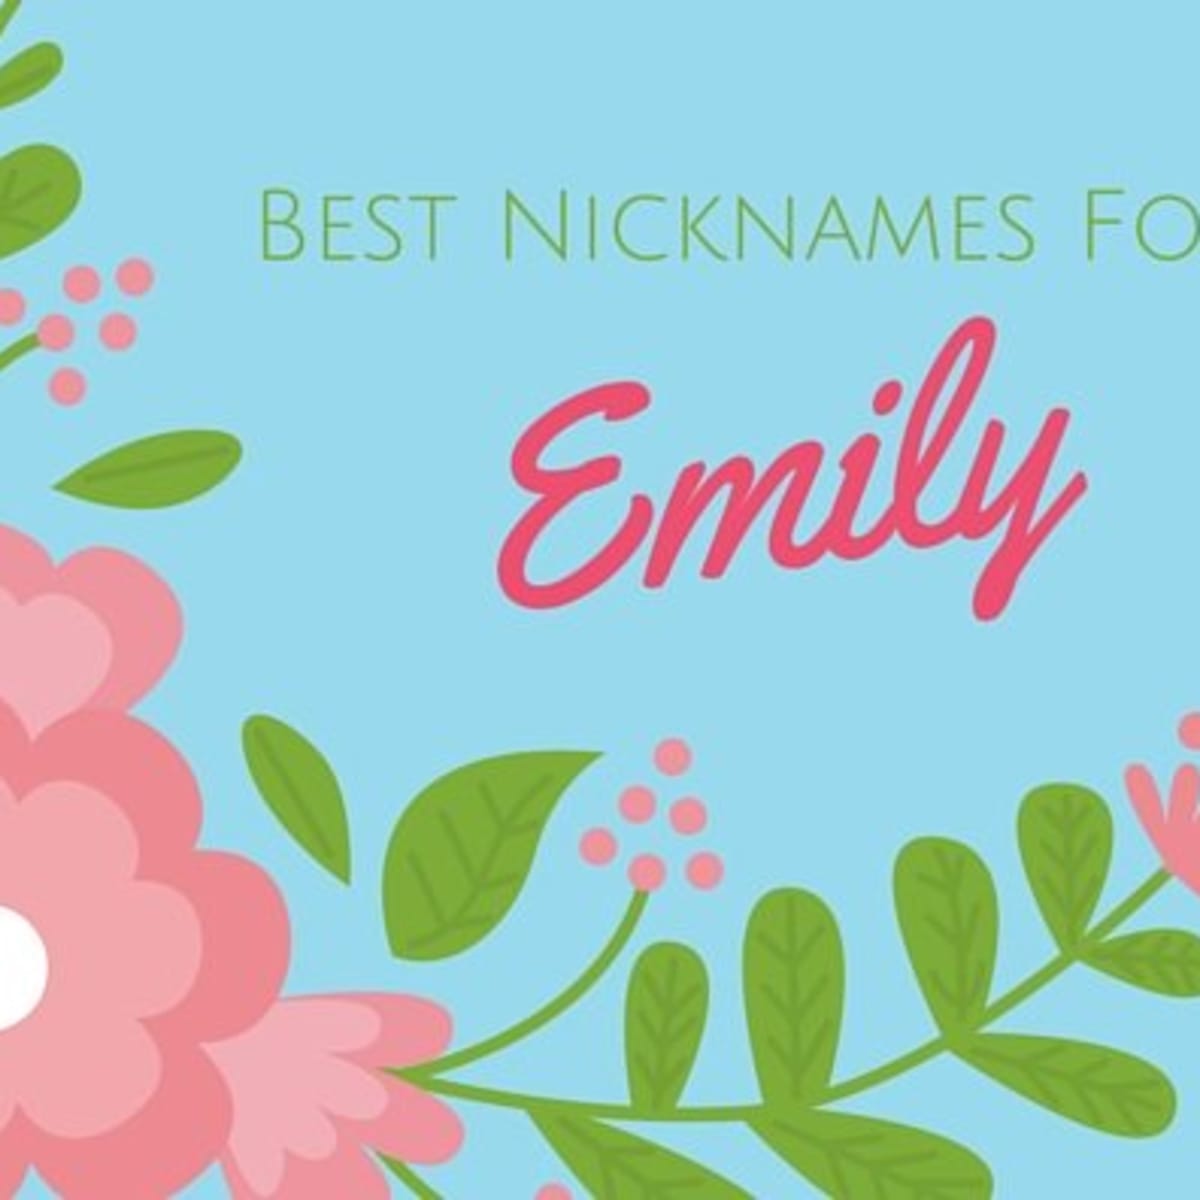 My name is beautiful. Best nicknames. Emily (given name). Good names. Beautiful nickname for girls.